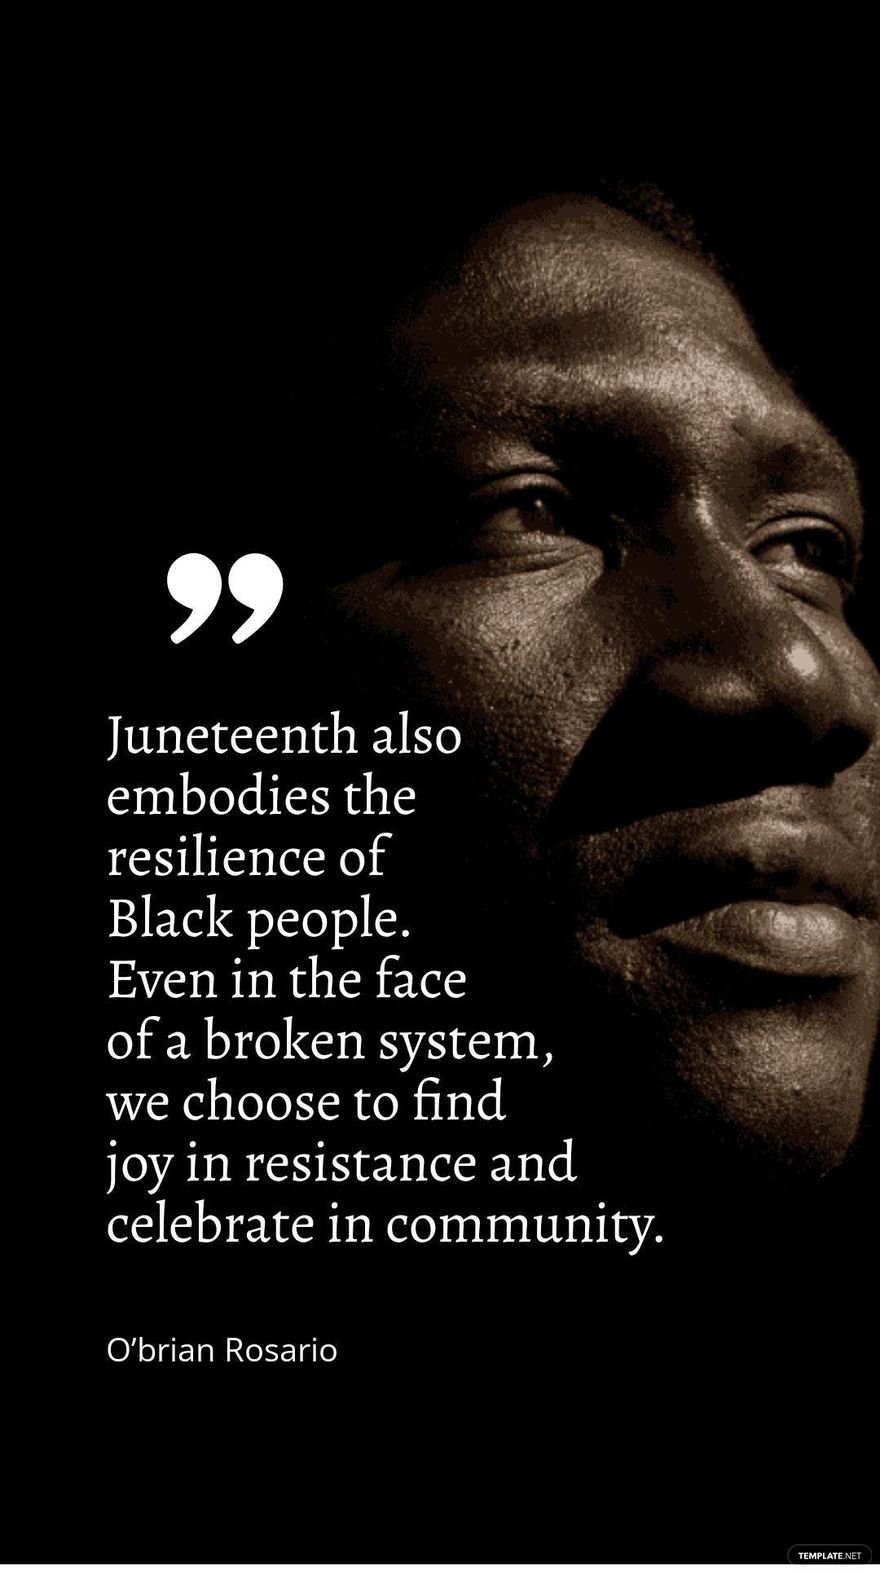 Free O’brian Rosario - Juneteenth also embodies the resilience of Black people. Even in the face of a broken system, we choose to find joy in resistance and celebrate in community. in JPG